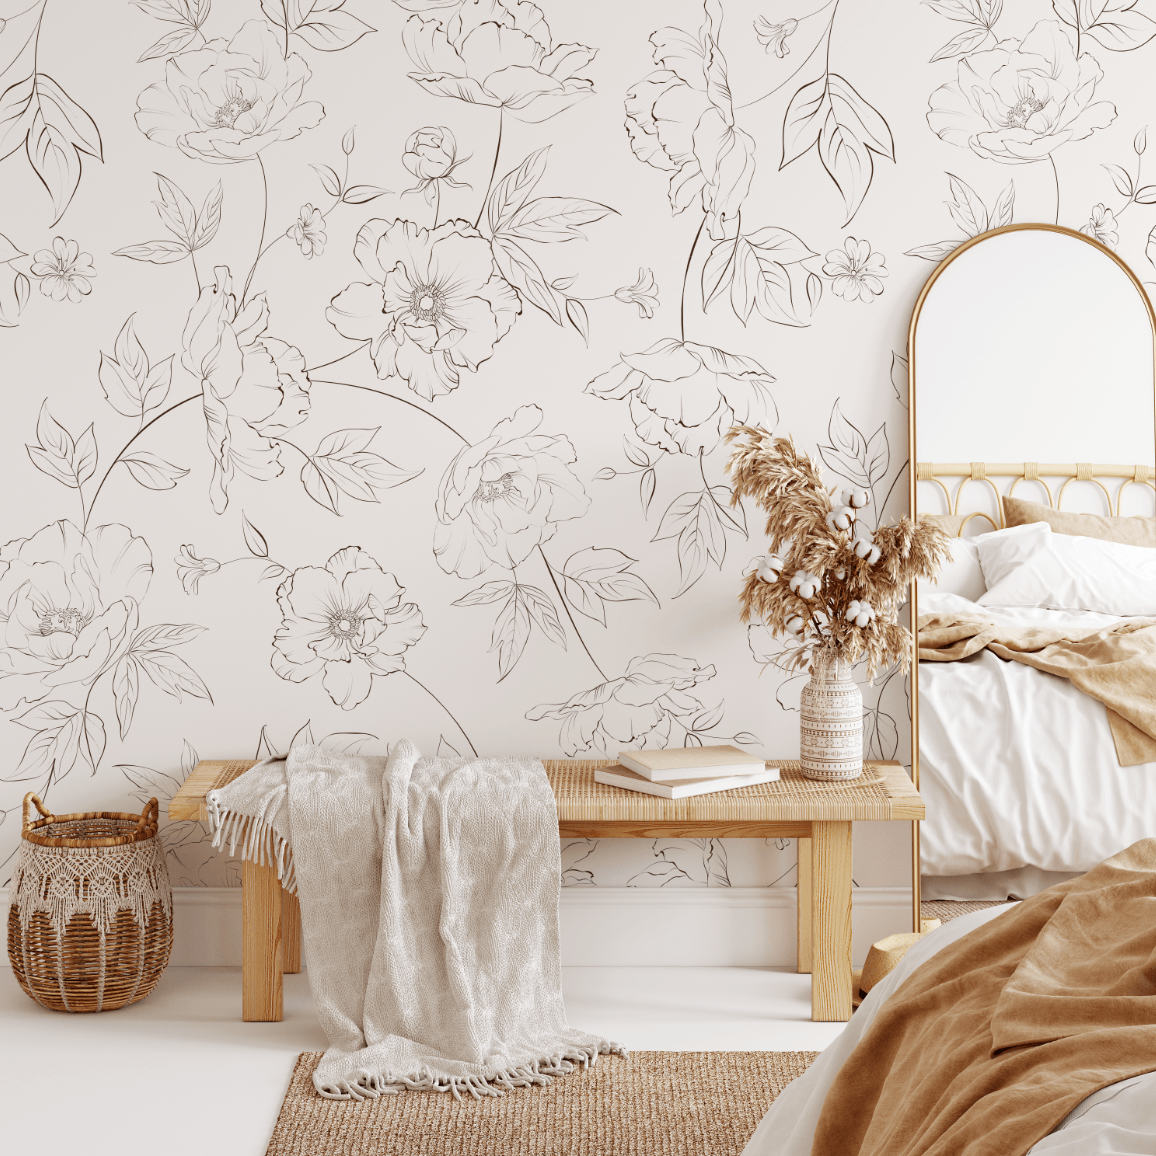 50 Girl bedroom wallpaper ideas – colors, prints and designs for every age